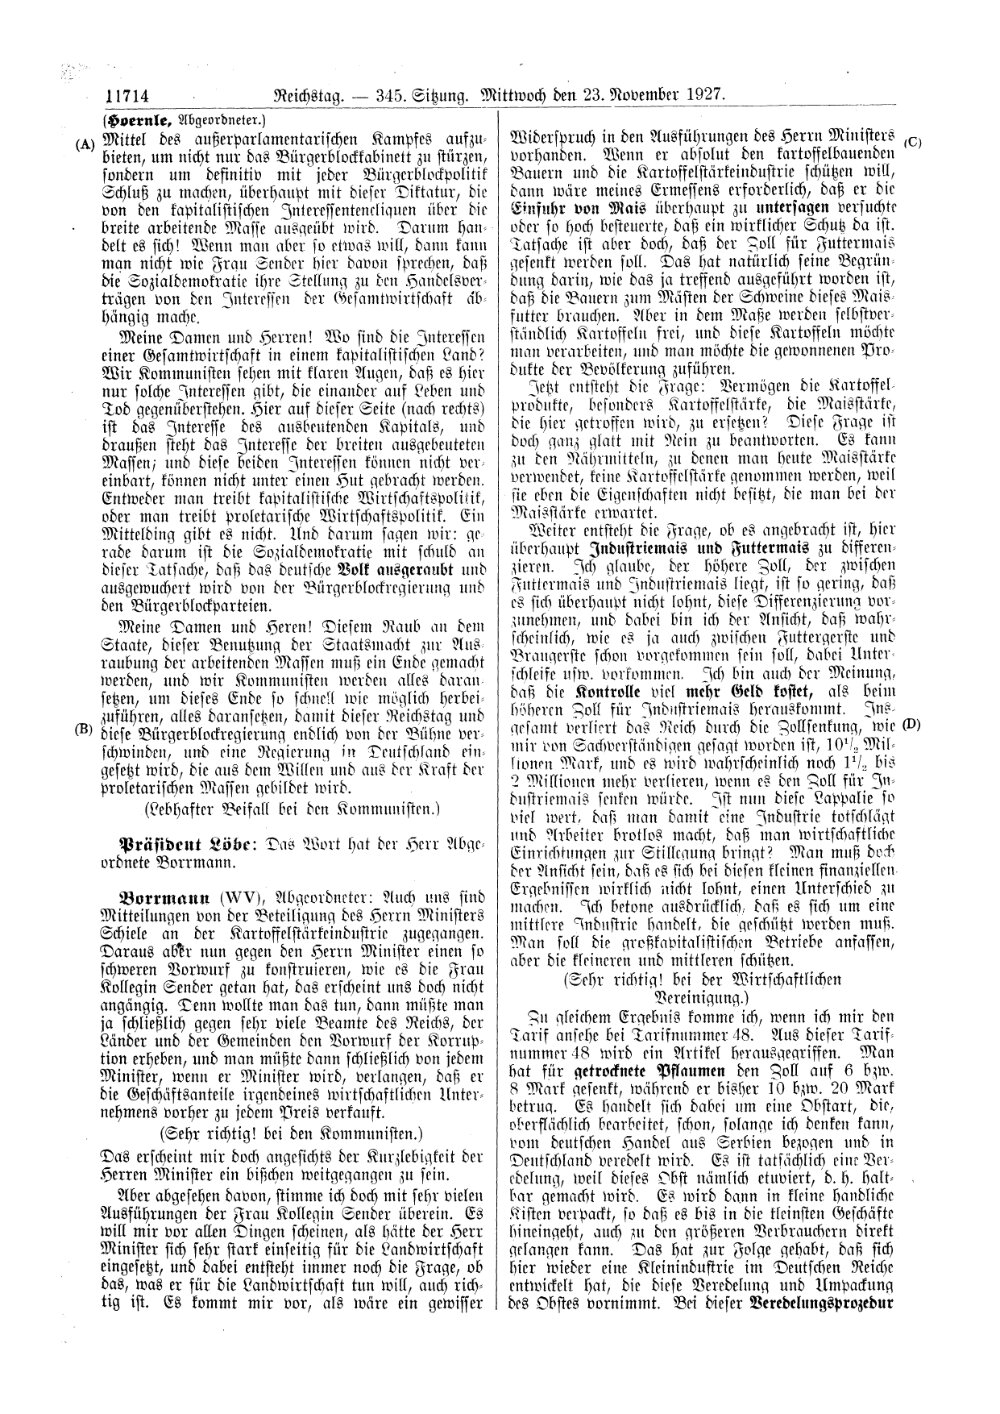 Scan of page 11714